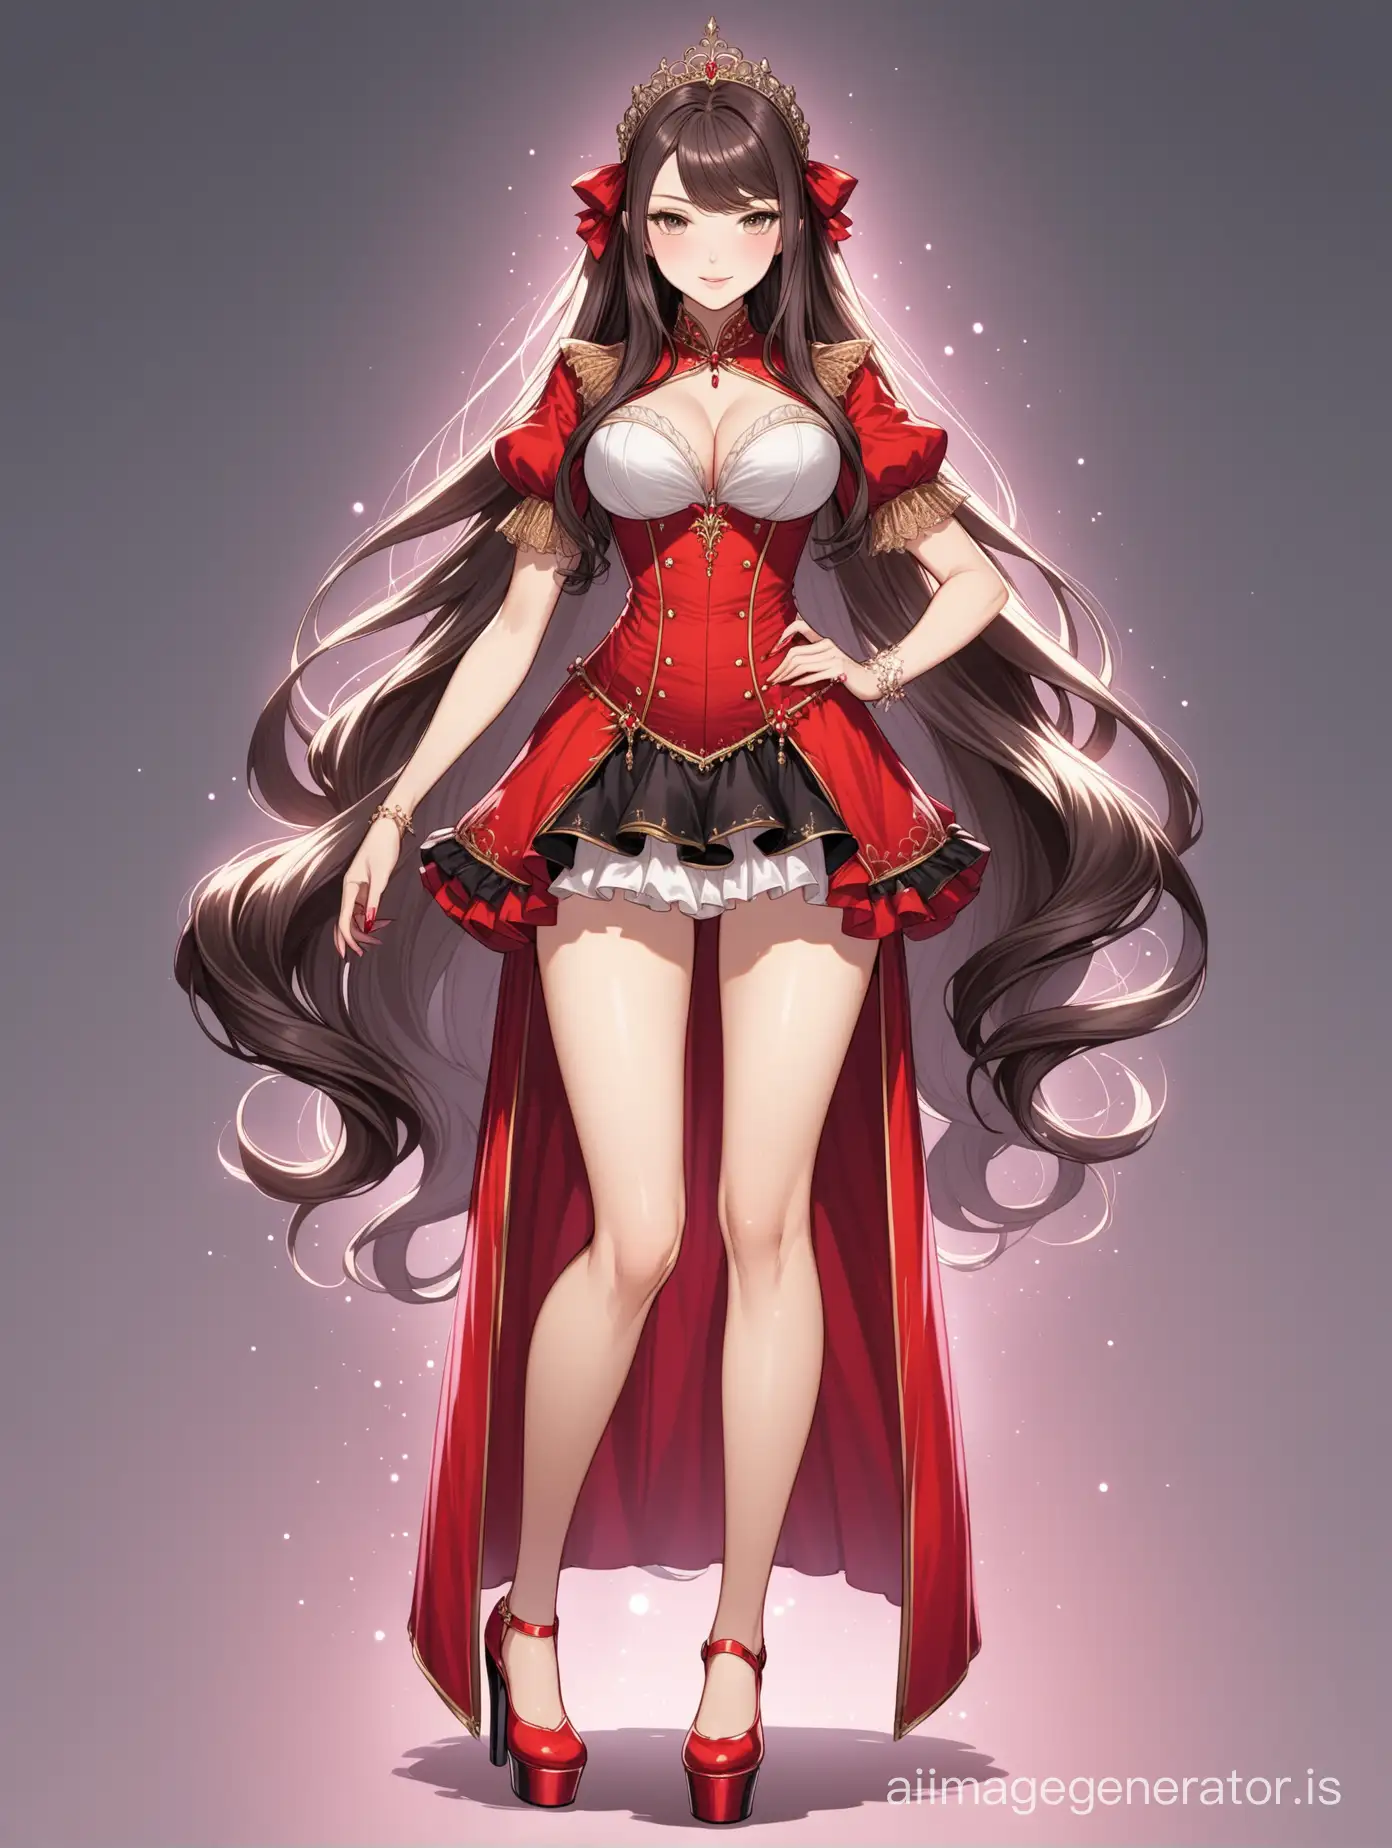 Full body image of a baroness girl with long hair wearing platform heels